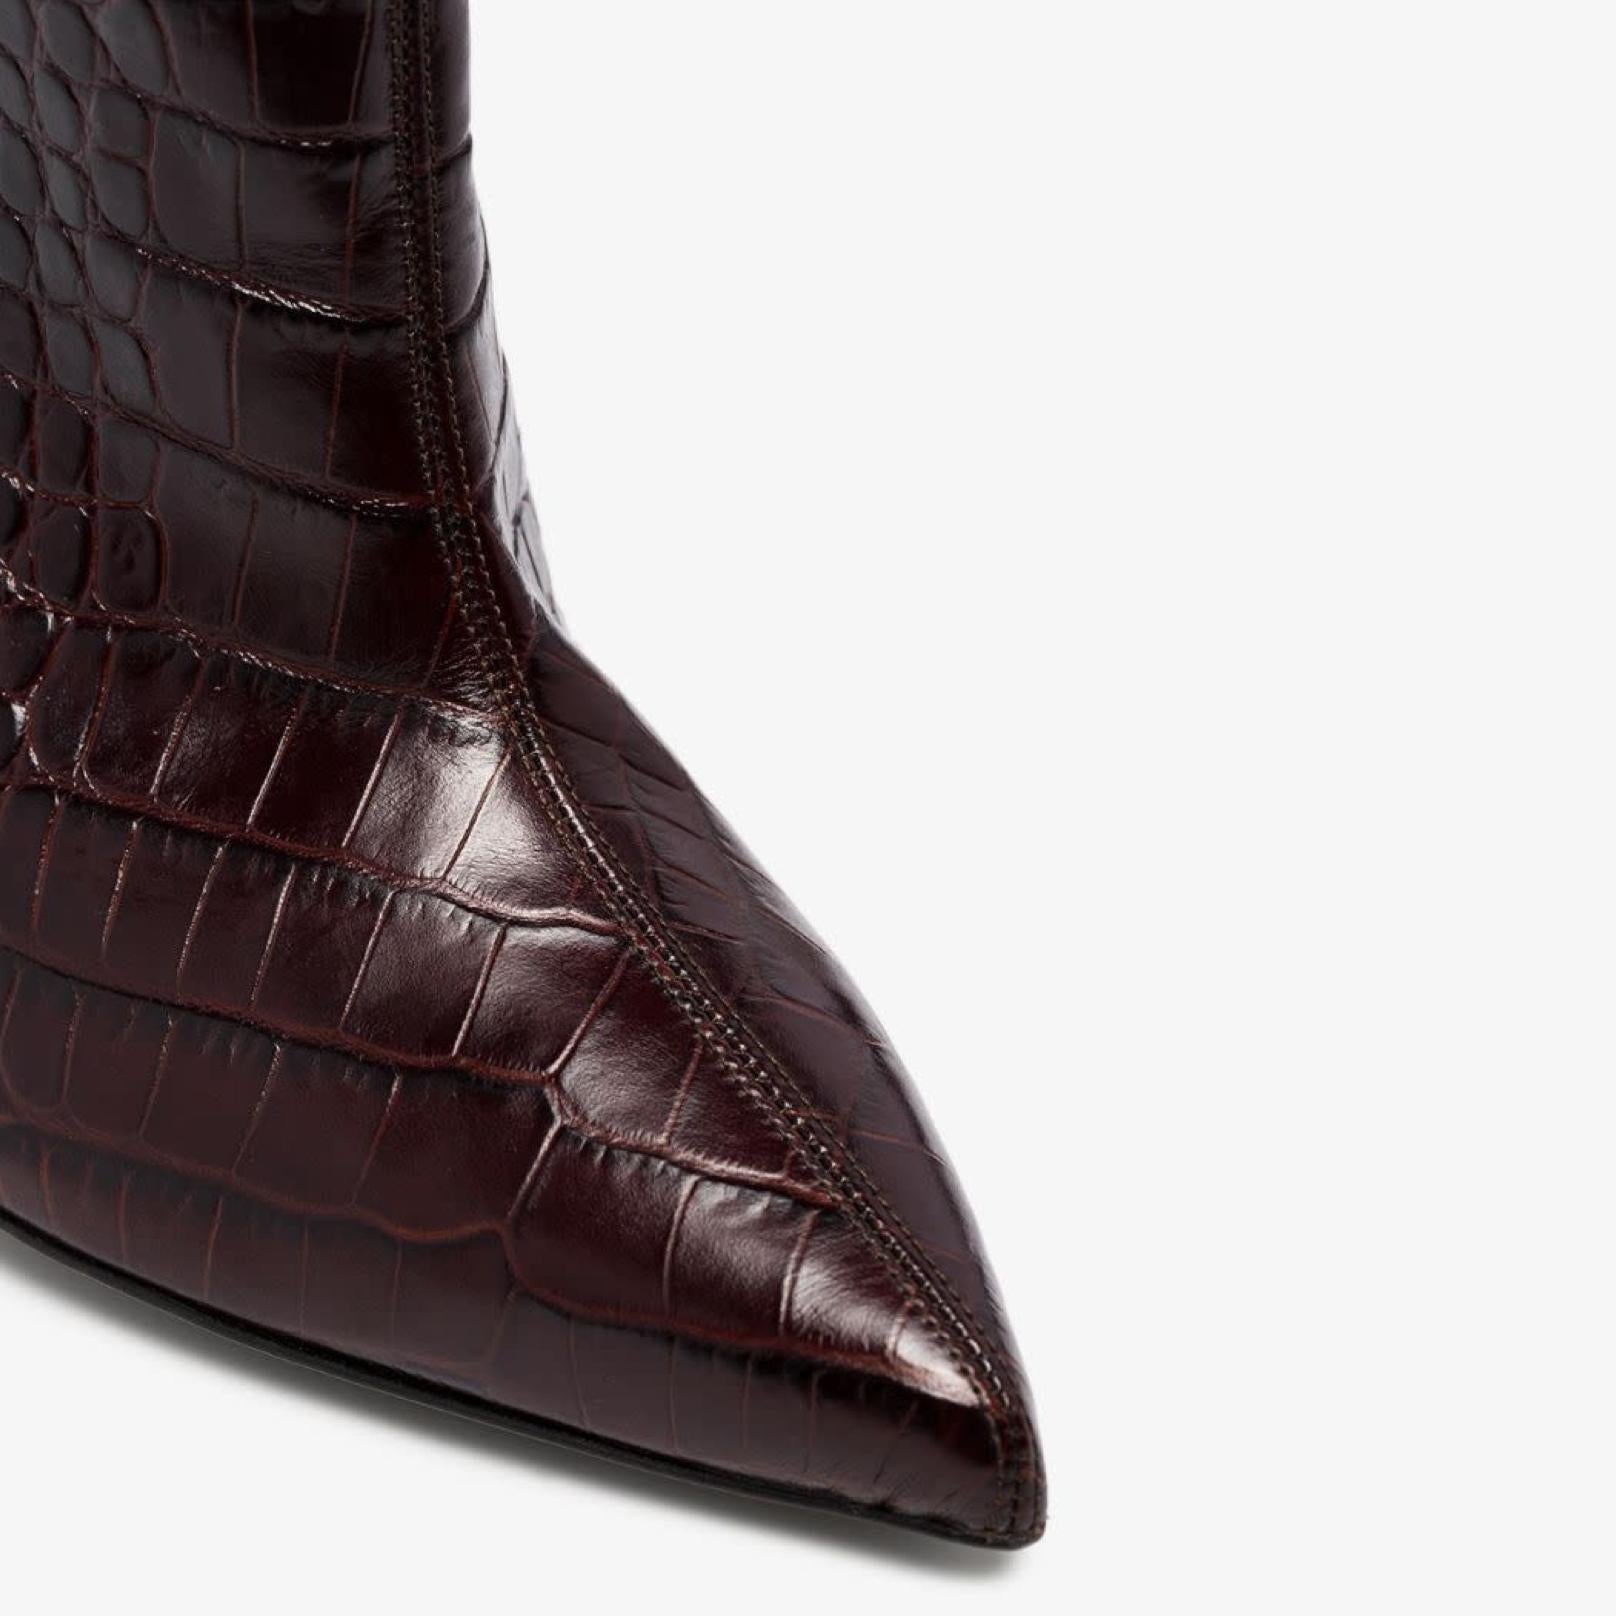 These brown Alexandre Vauthier Alex 90 crocodile-embossed leather boots are made from leather with crocodile-effect embossing. They feature a pointed toe, wide silhouette, side zip fastening and 90-mm high stiletto heel.
Designer Style ID: